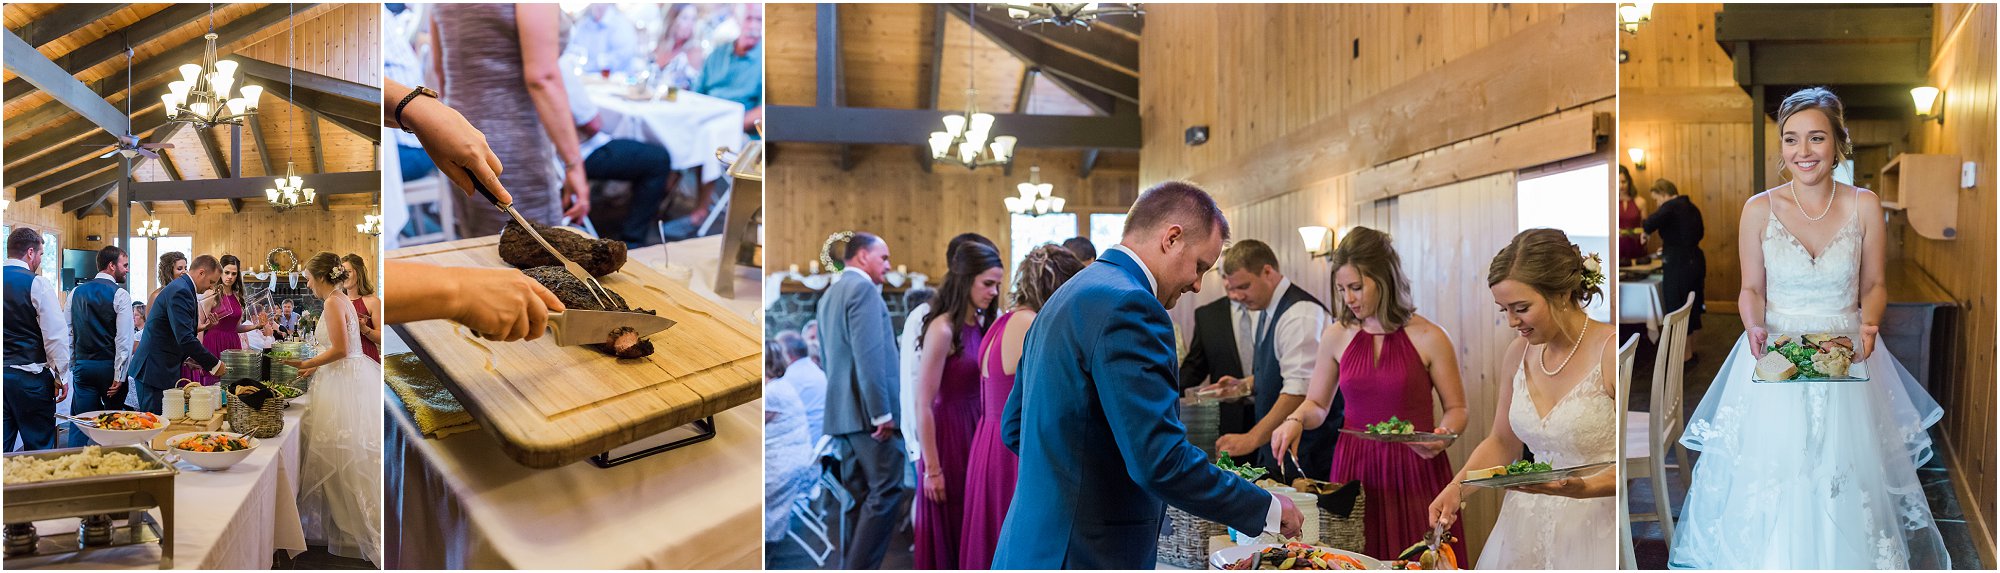 The wedding party makes their way through the buffet line provided by Bleu Bite Catering at their Rock Springs Ranch Wedding in Bend, OR. Captured by Bend wedding photographer Erica Swantek photography.